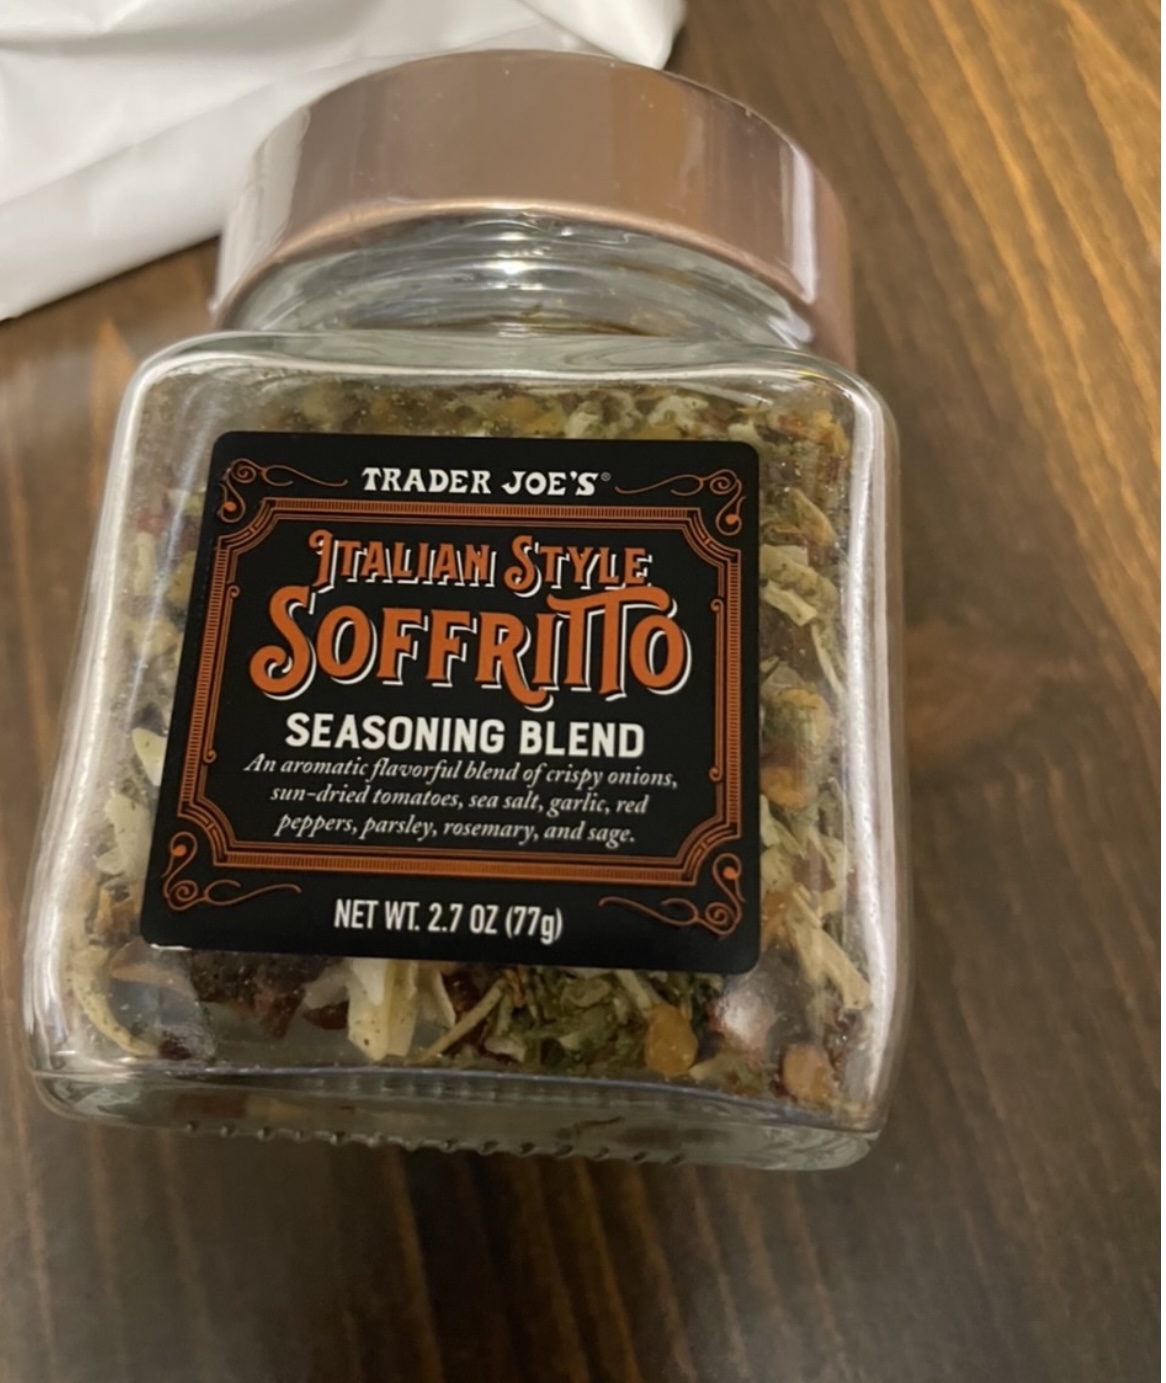 Recommended seasonings from Trader Joe’s. Photo taken by and the property of FourWalls.